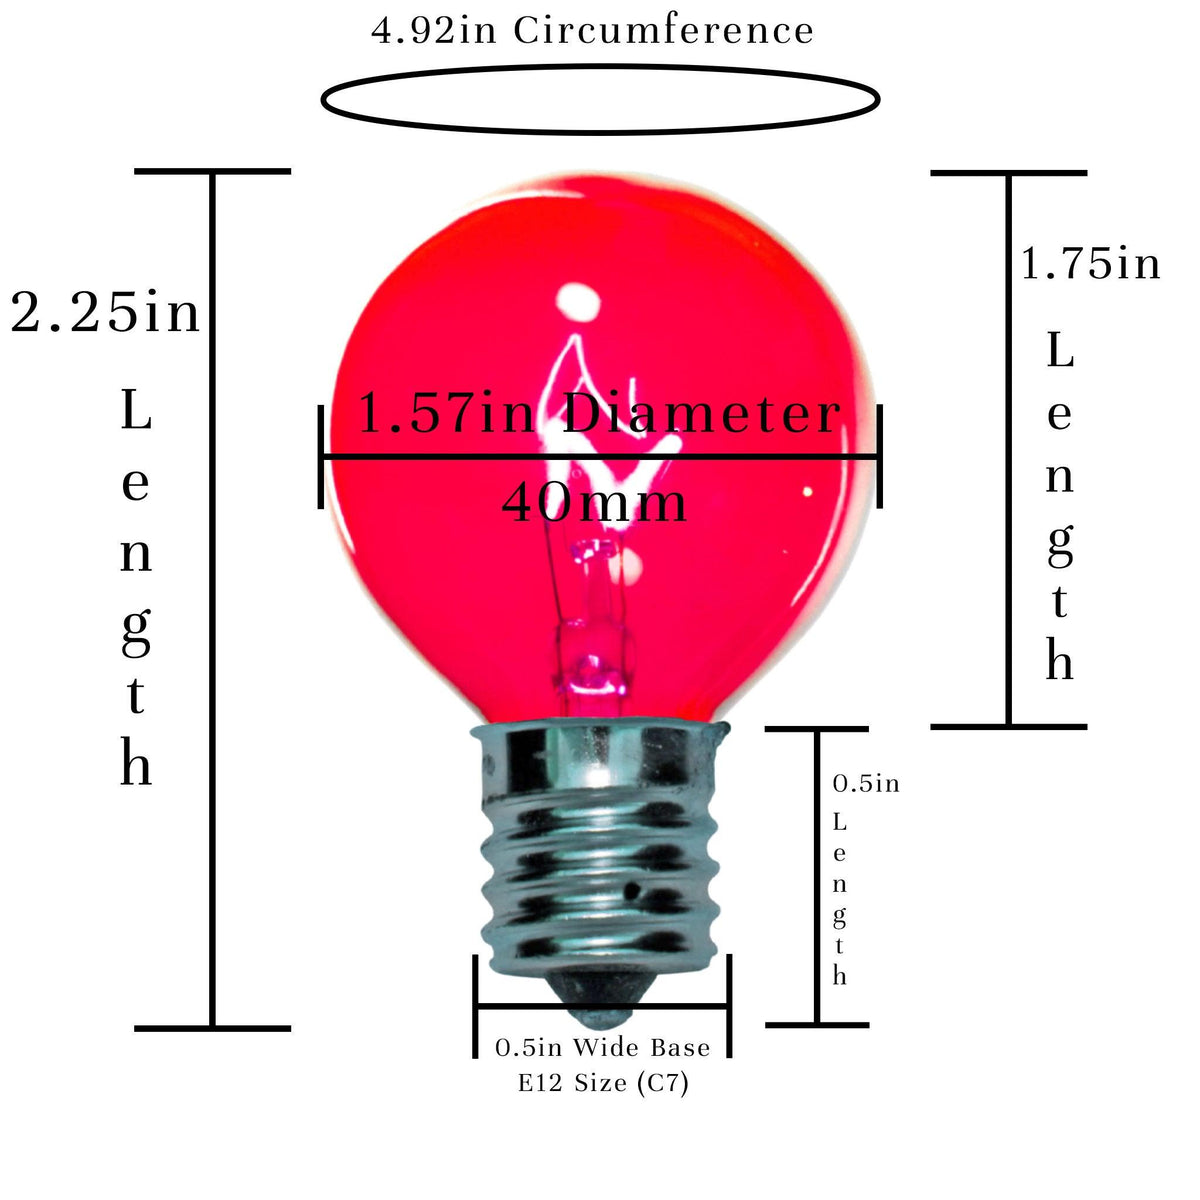 Size of a G40 Light Bulb available for sale on Leedisplay.com